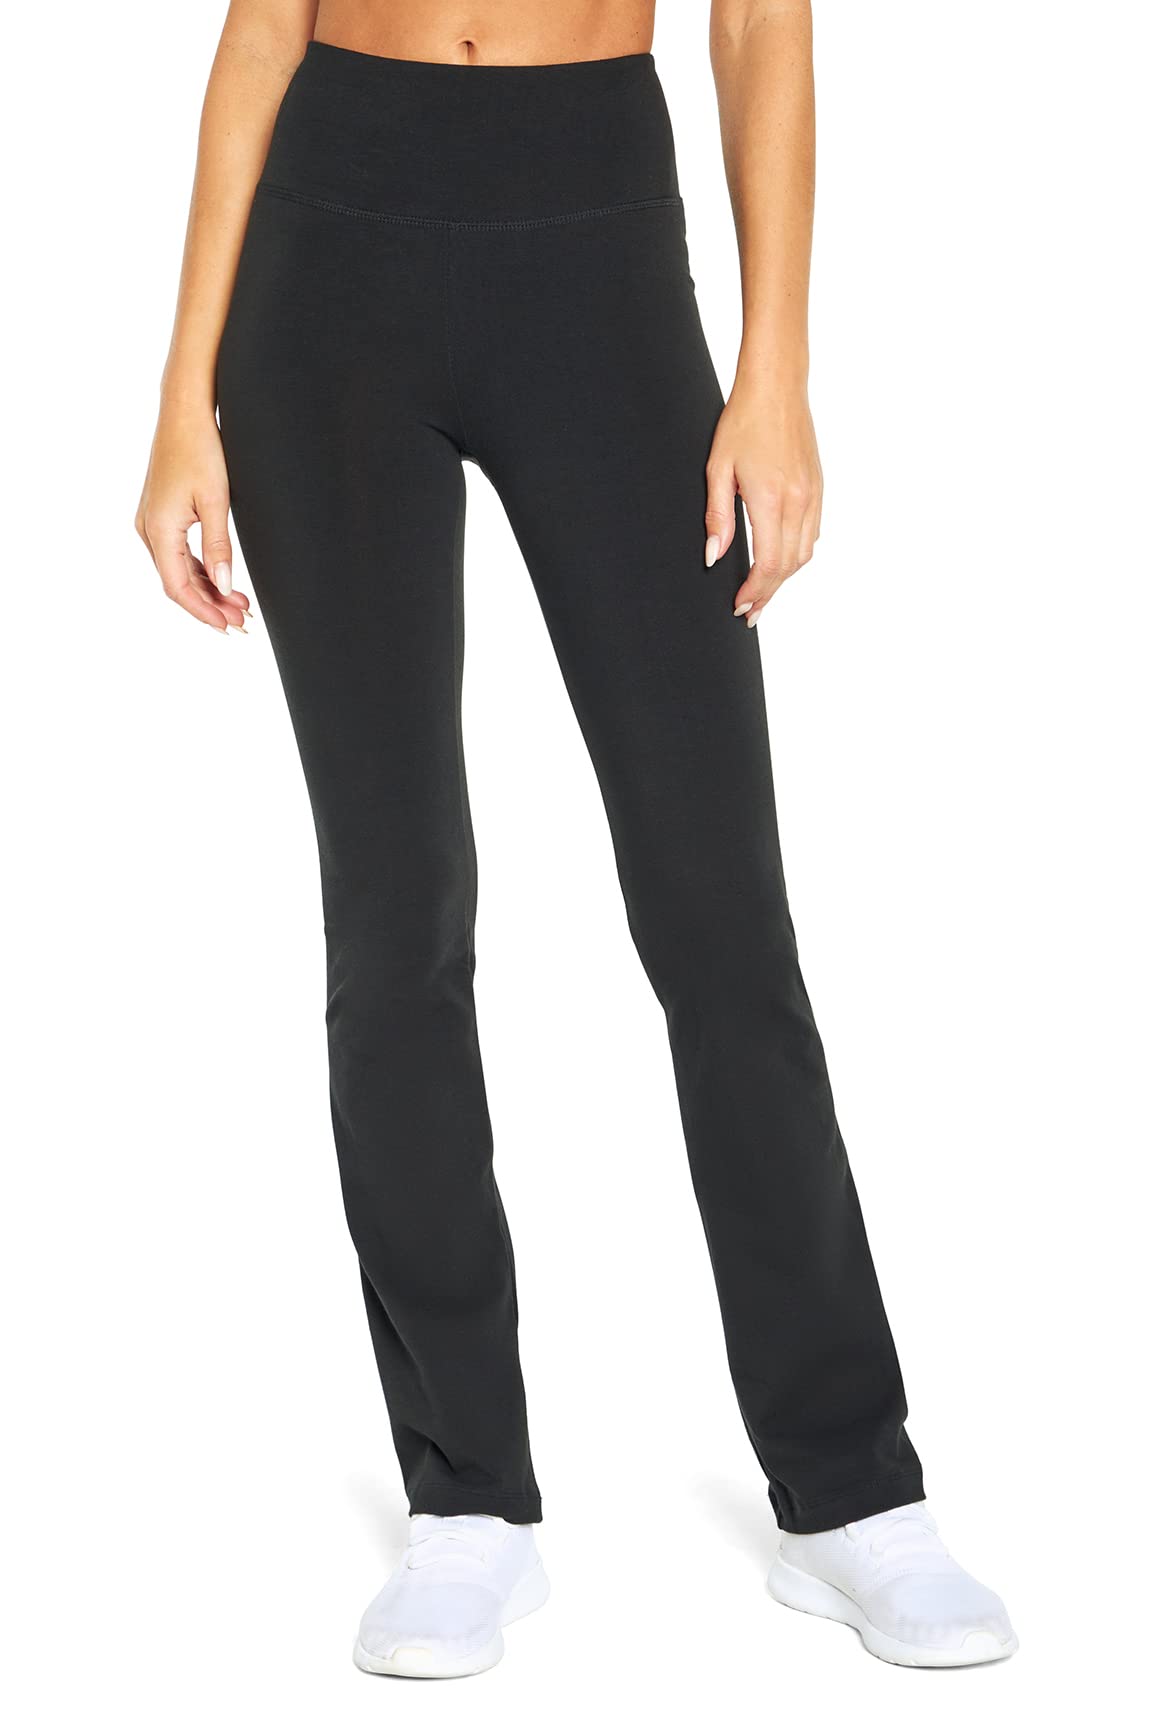 Bally Total Fitness Women’s The Legacy Tummy Control Pant